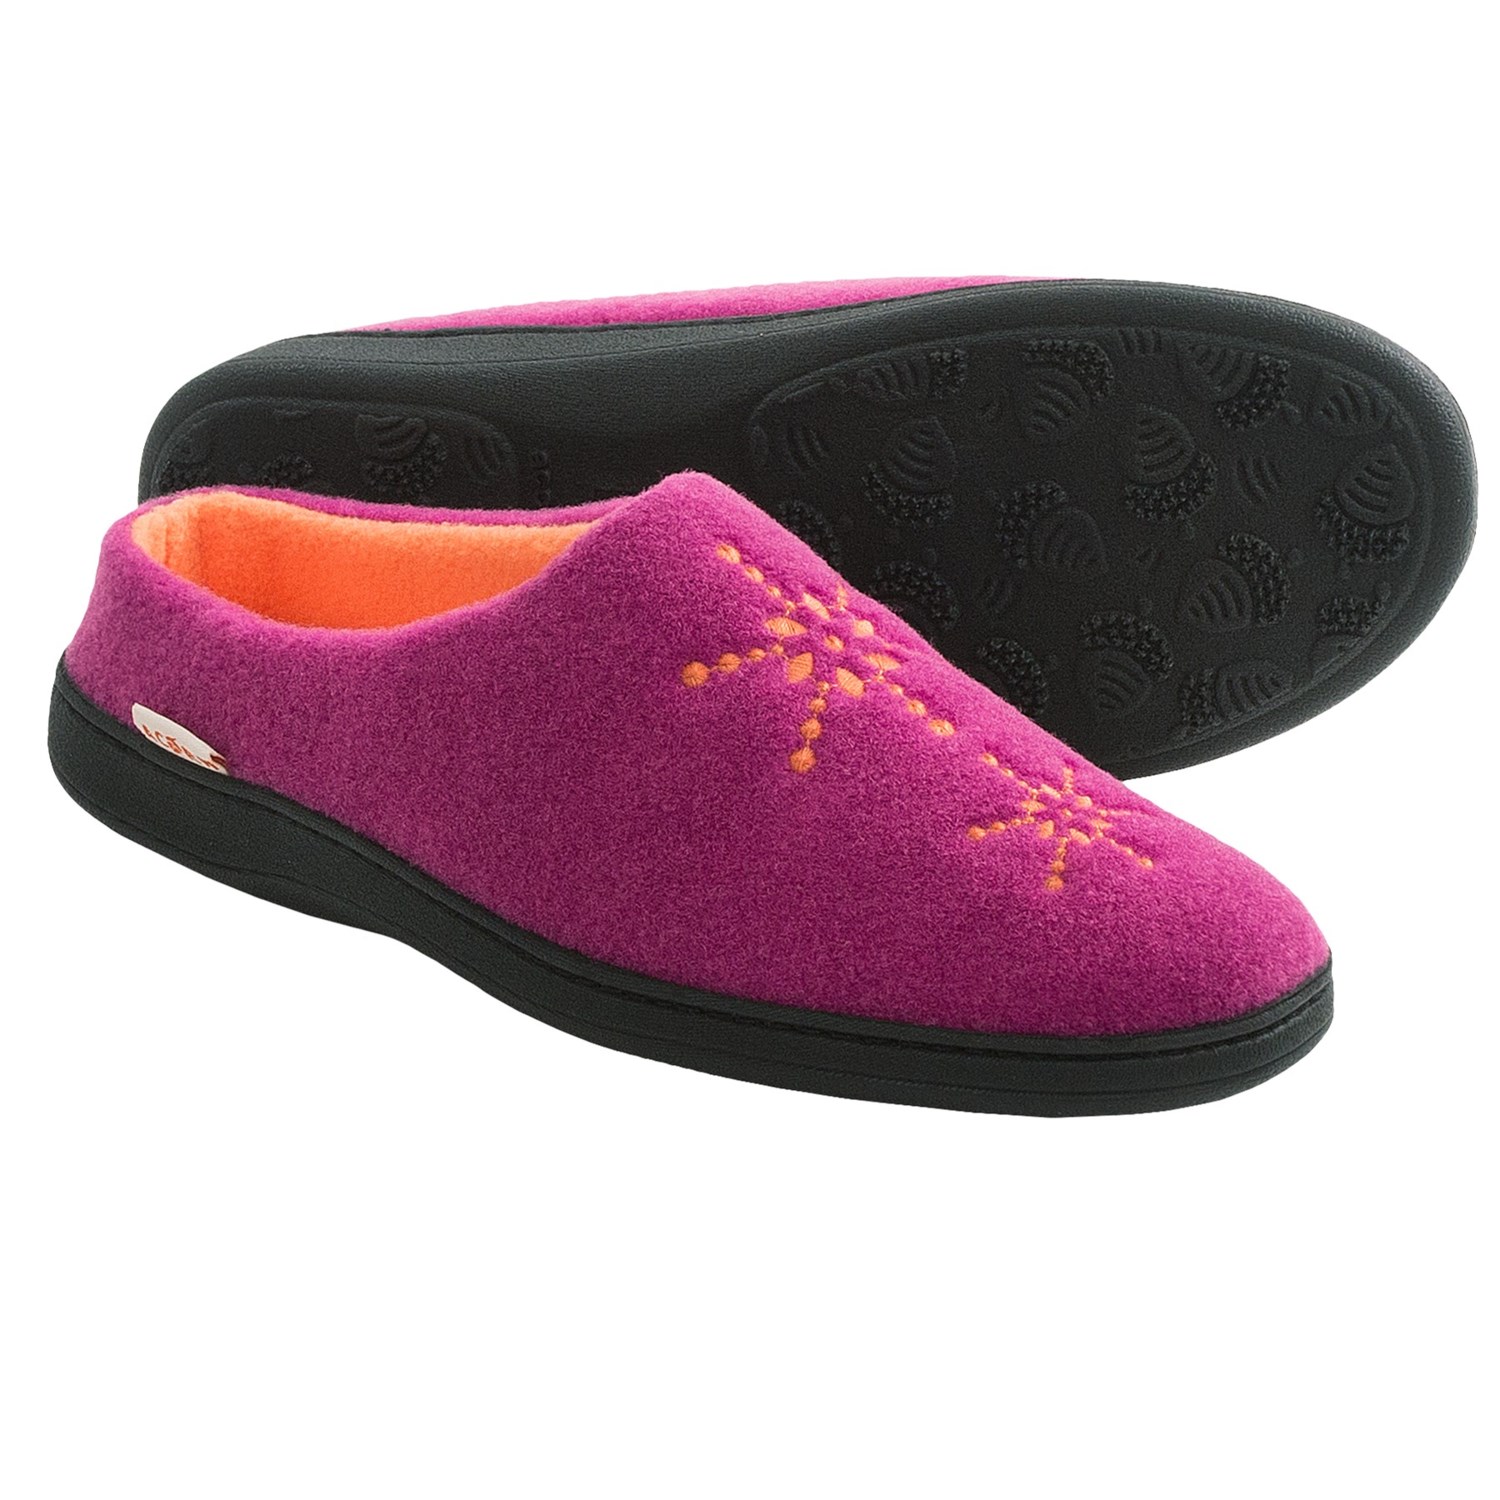 Acorn Plush Embroidered Mule Slippers (For Women) 7643T - Save 66%